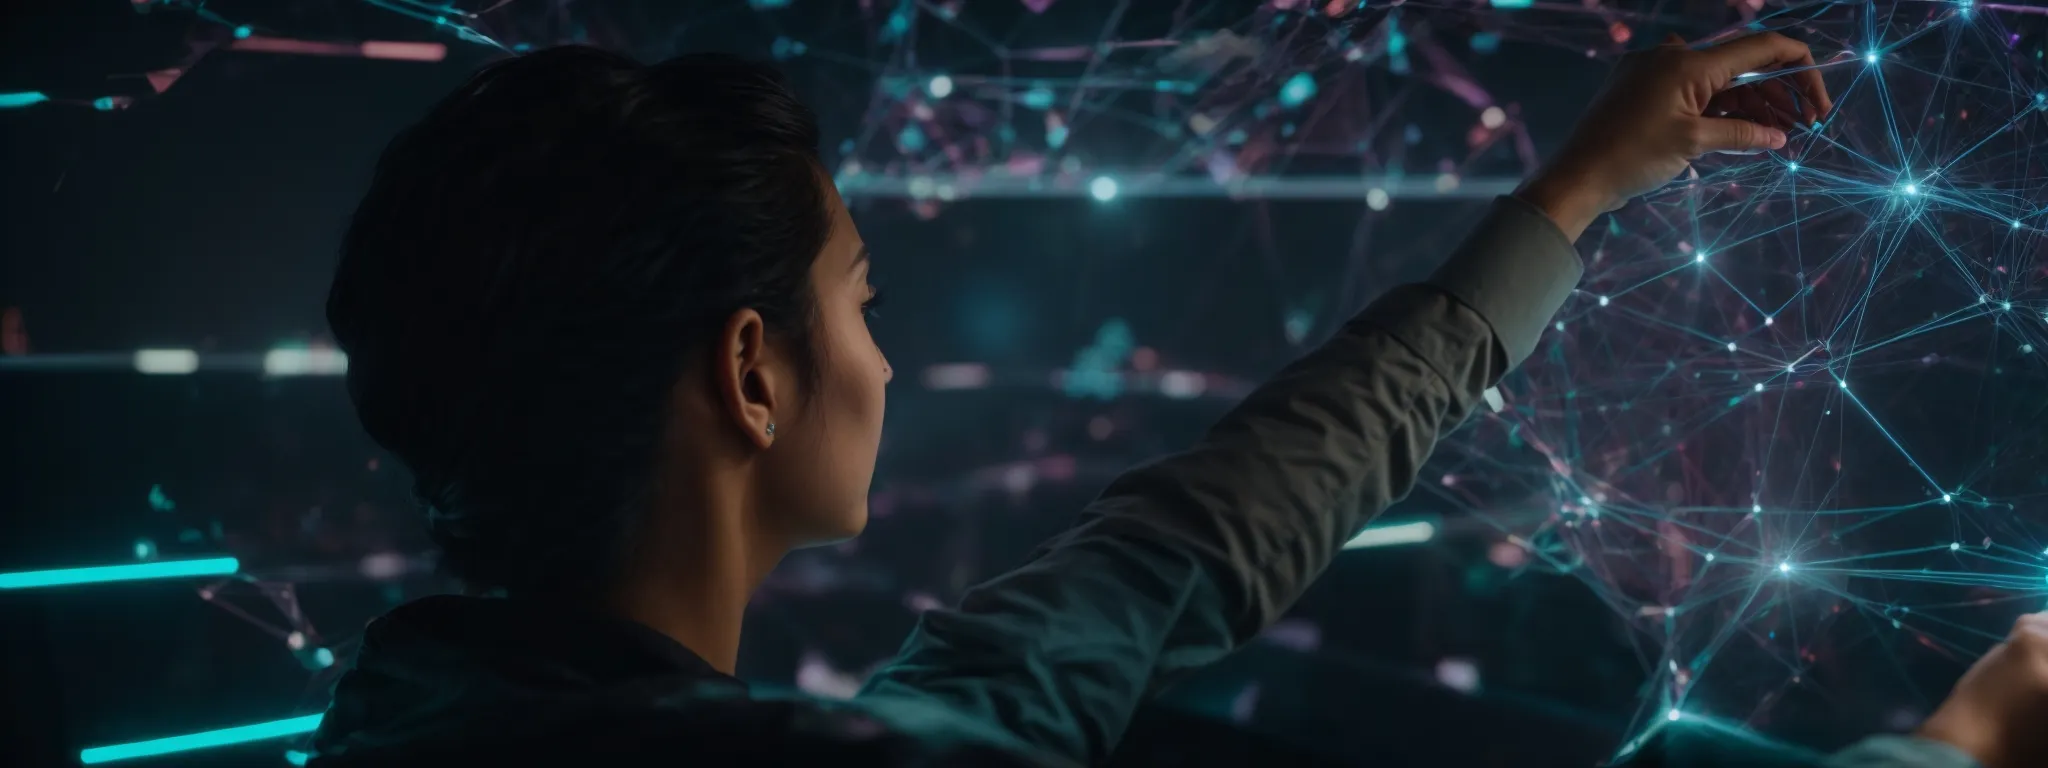 a person examining a holographic interface of interconnected nodes representing a futuristic network.